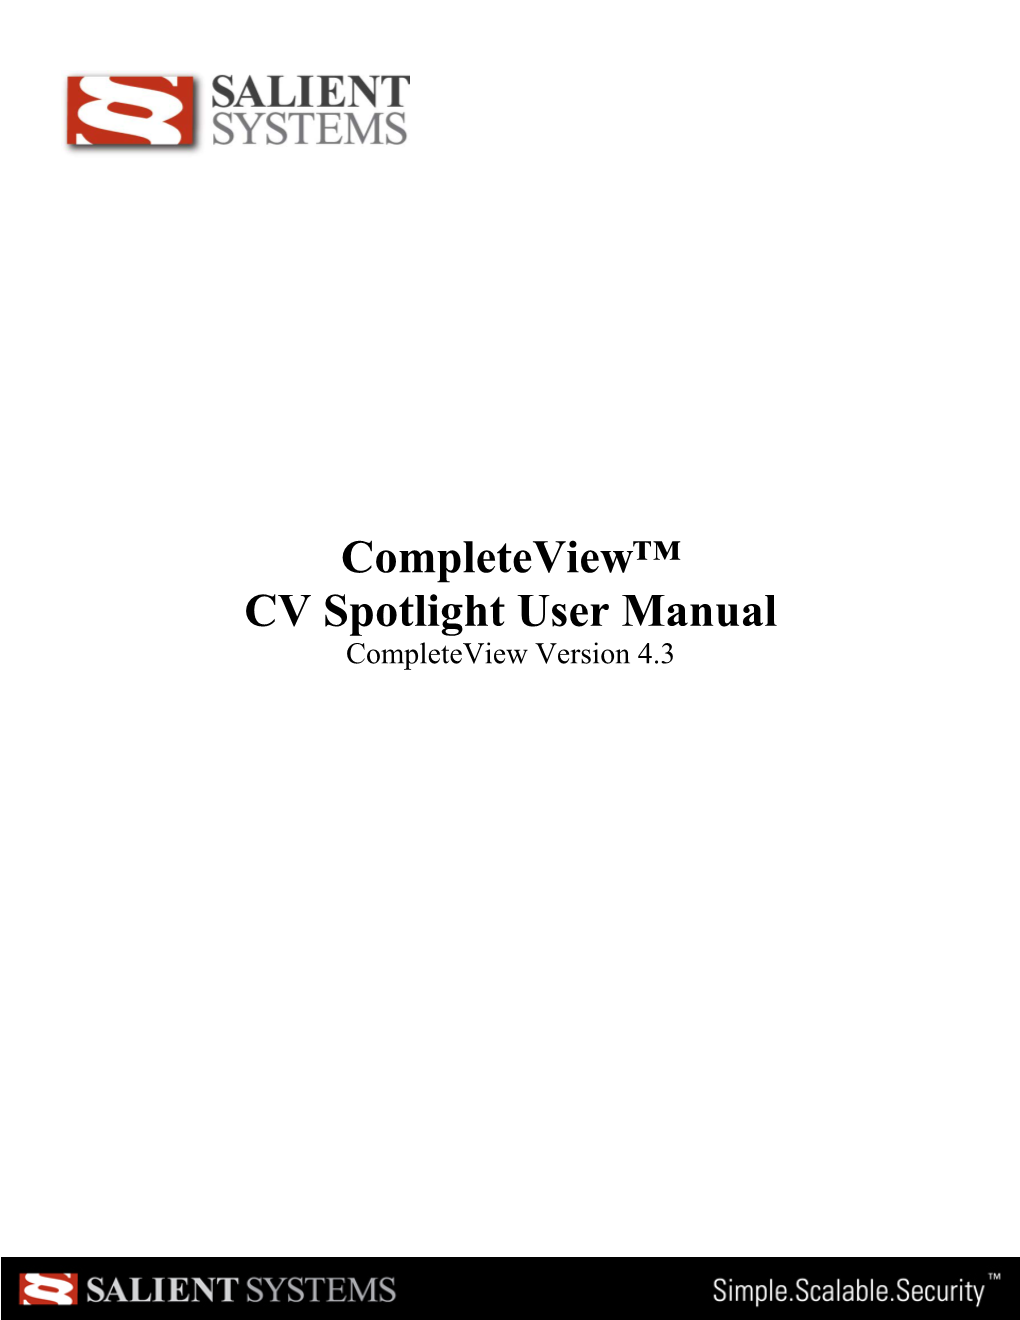 Completeview™ CV Spotlight User Manual Completeview Version 4.3